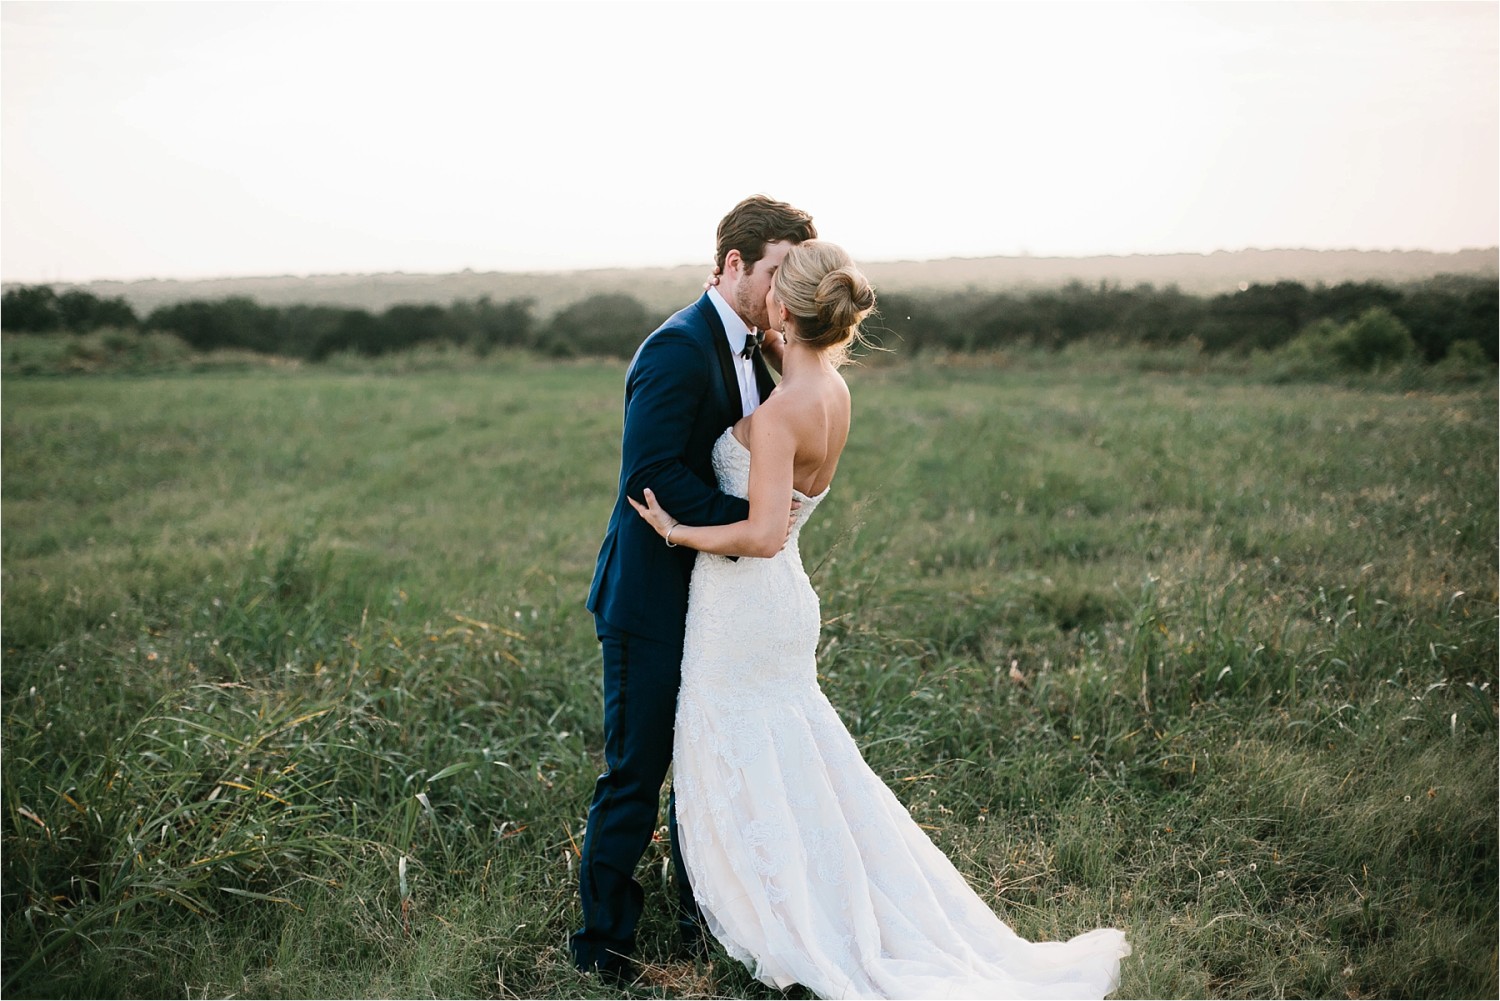 David + Mikayla || a whimsical after session - Rachel Meagan ...